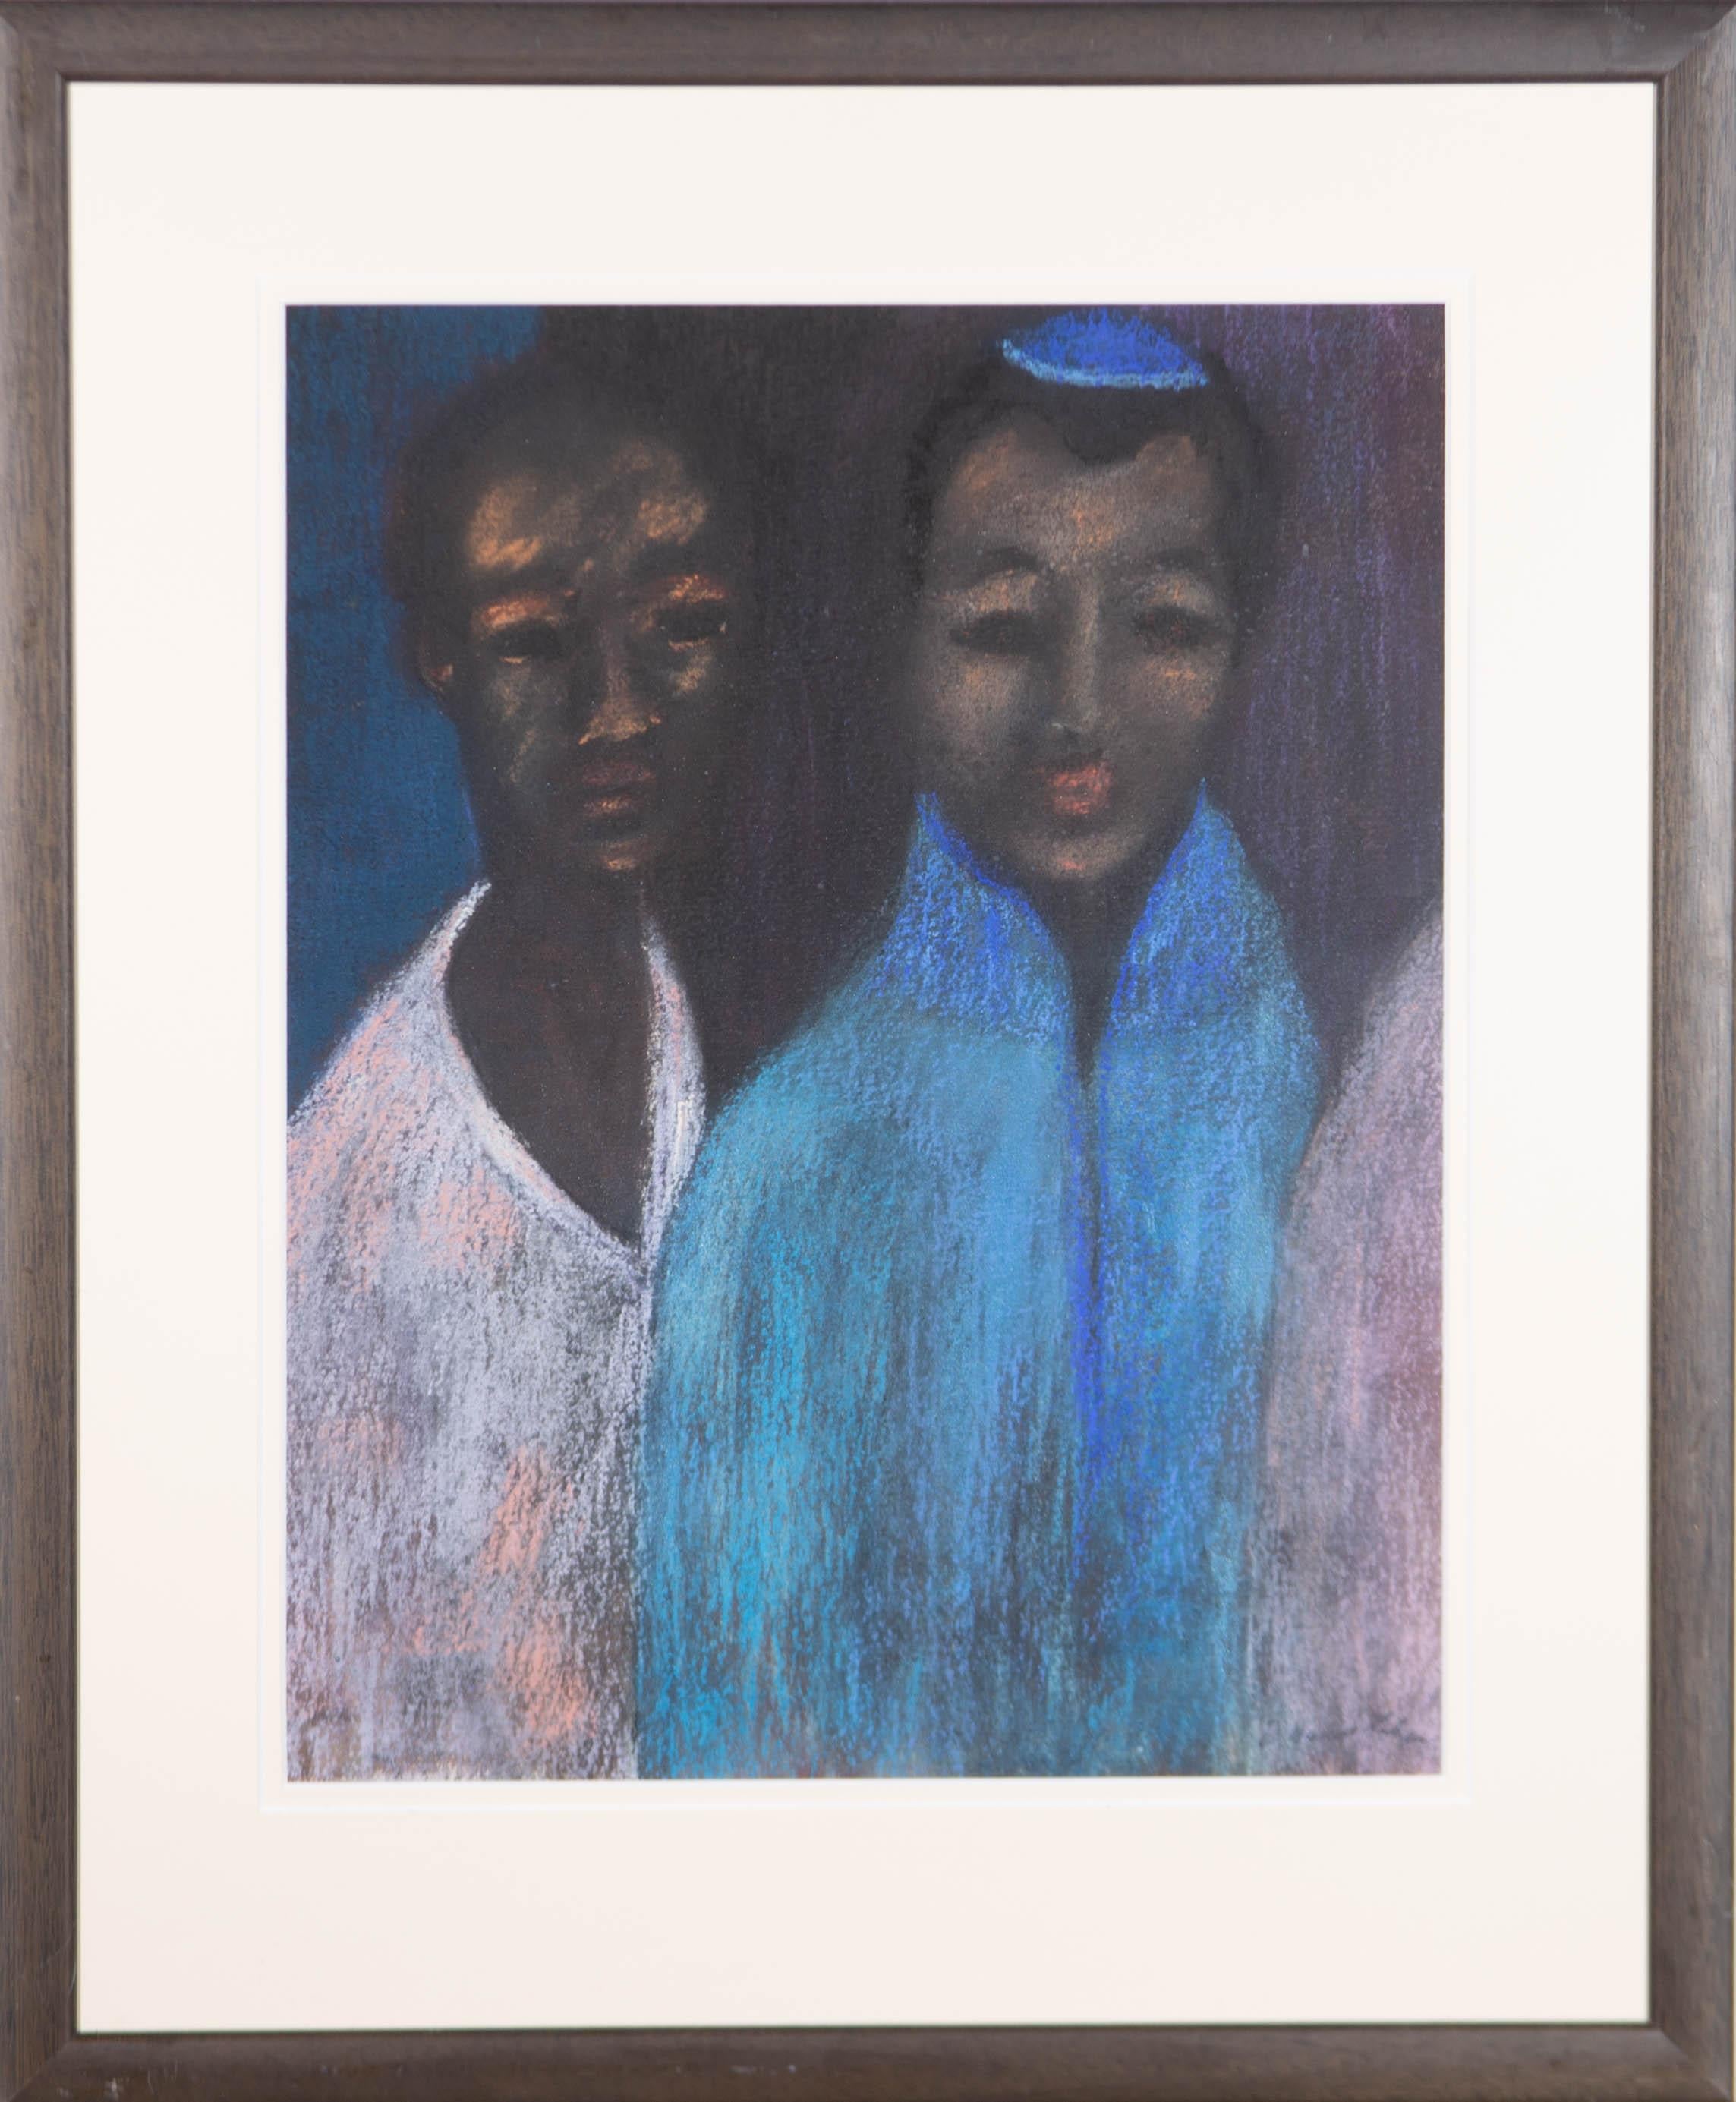 A fine pastel painting, depicting two standing figures. First name of the artist's signature is illegible. Signed to the lower right-hand corner. Well-presented in a double card mount and in a dark wooden frame. On wove.